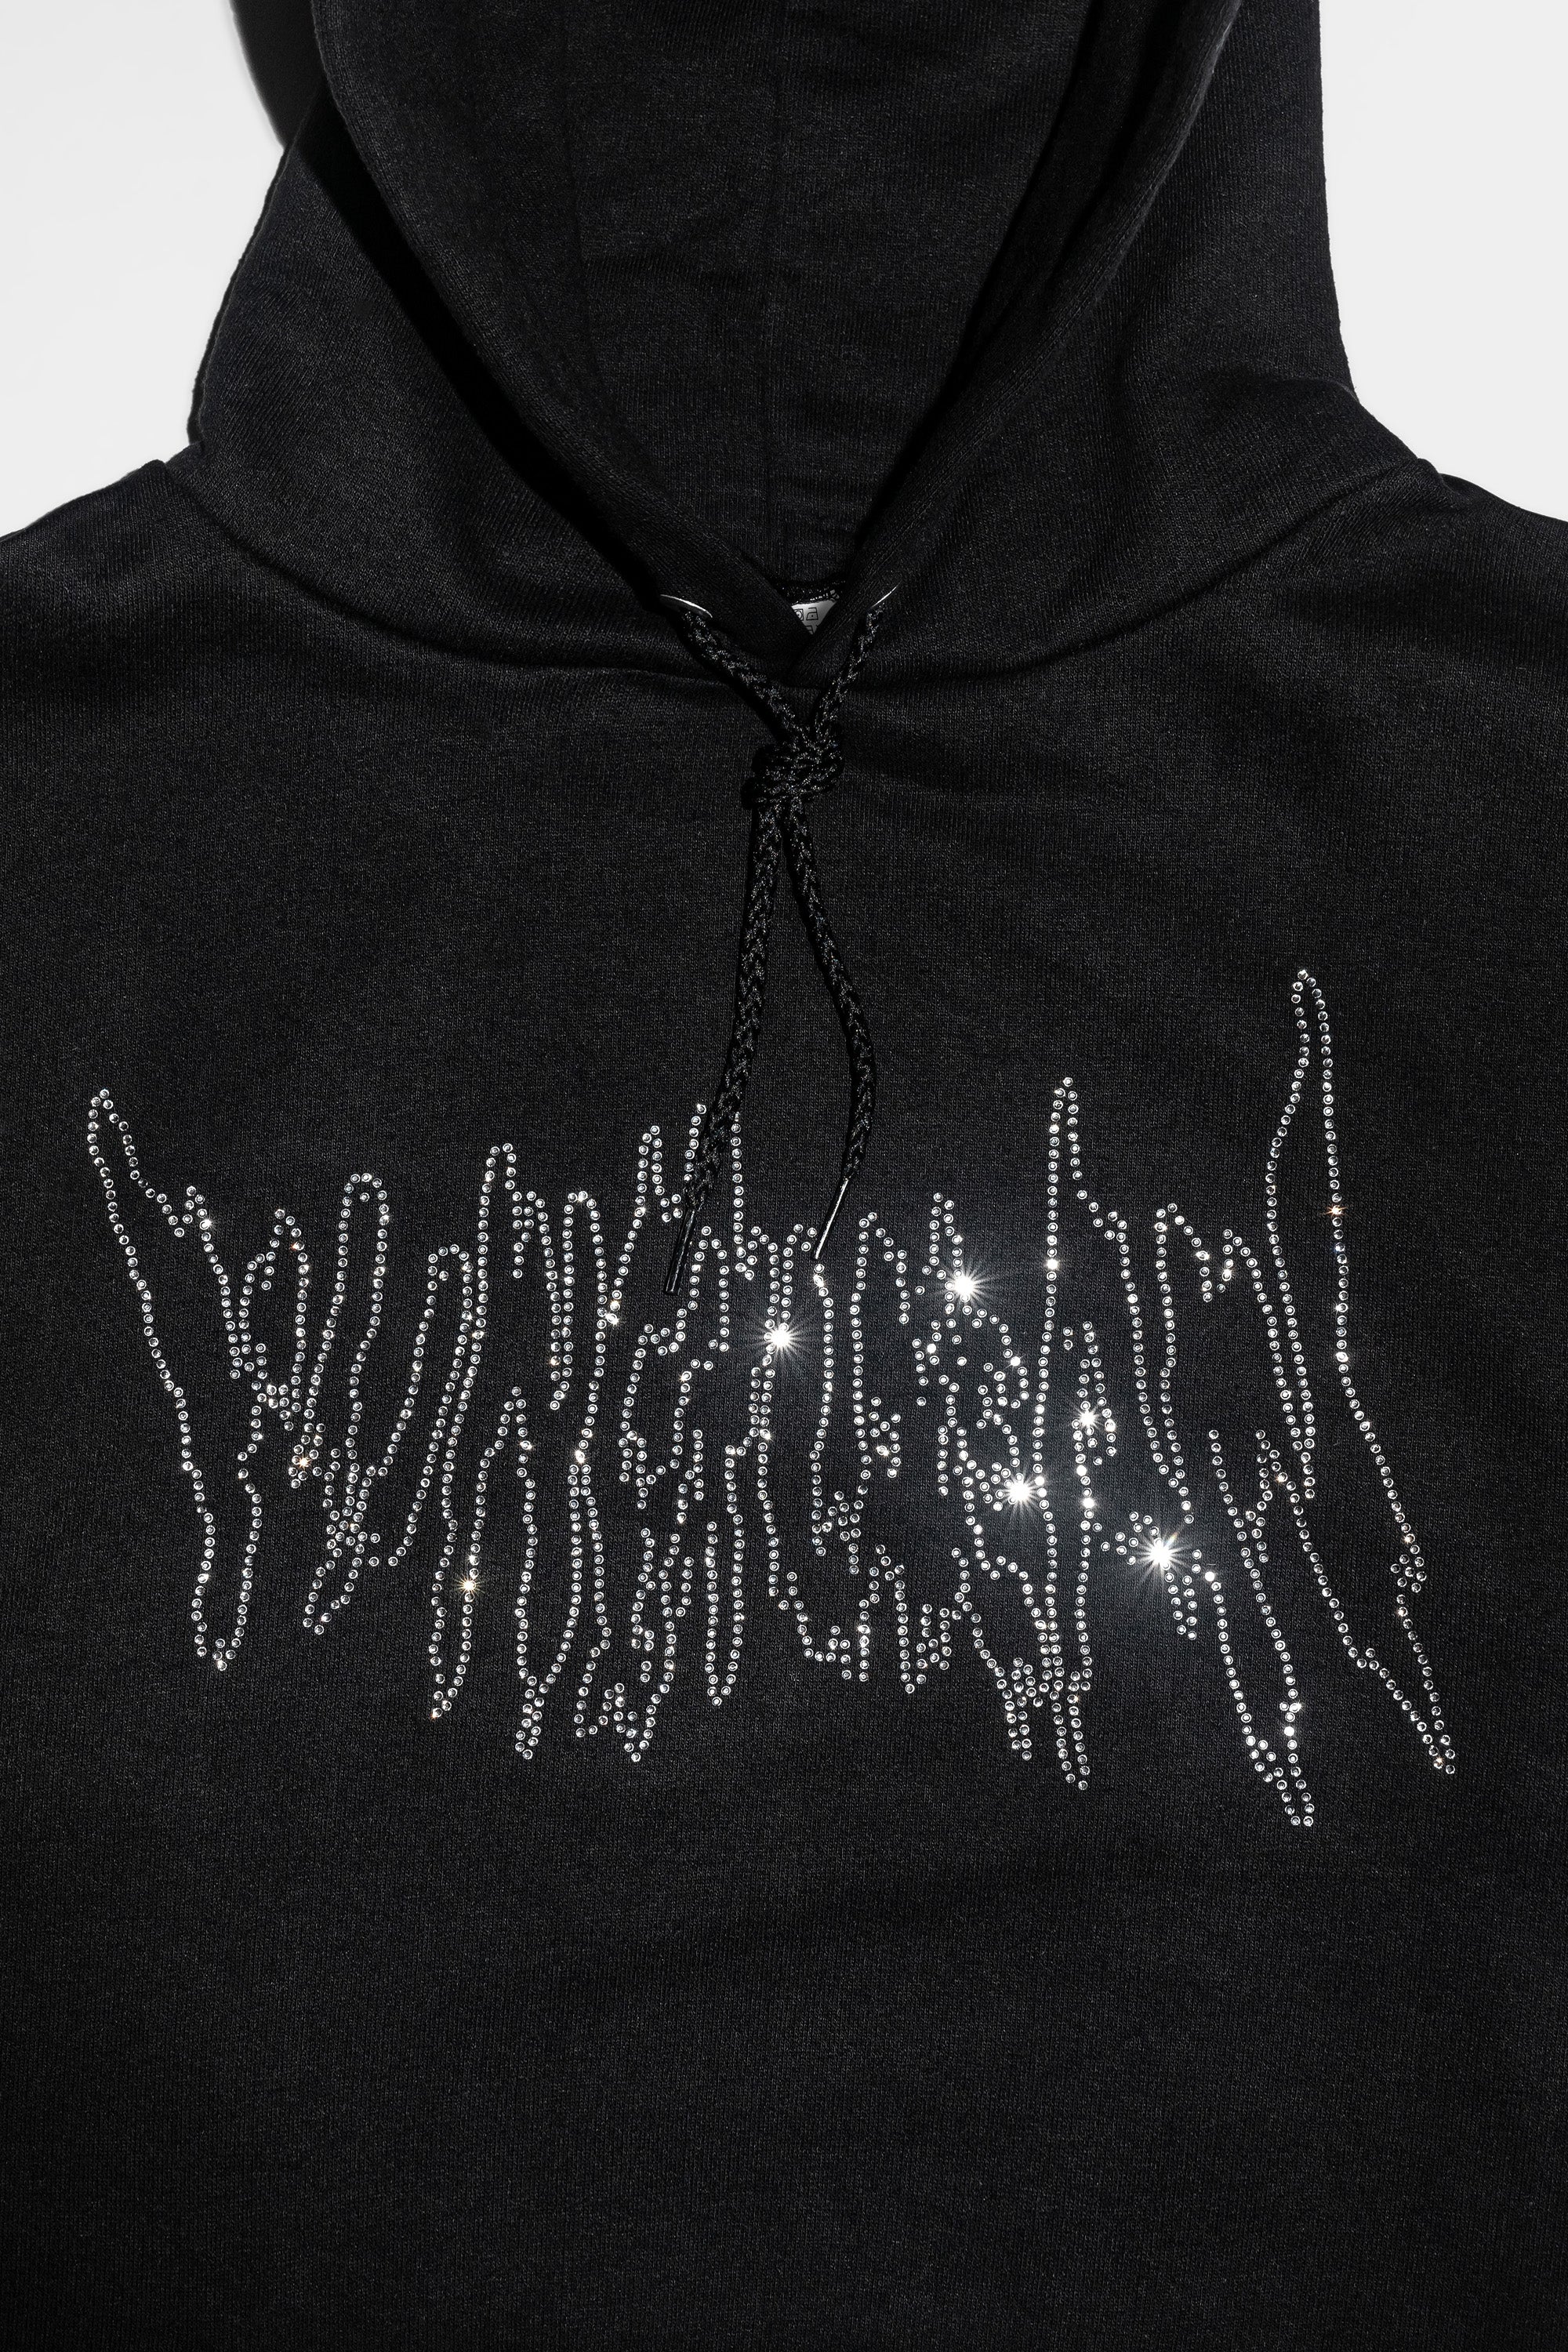 HAVE A NICE DAY HOODIE (BLACK WITH CRYSTALS)